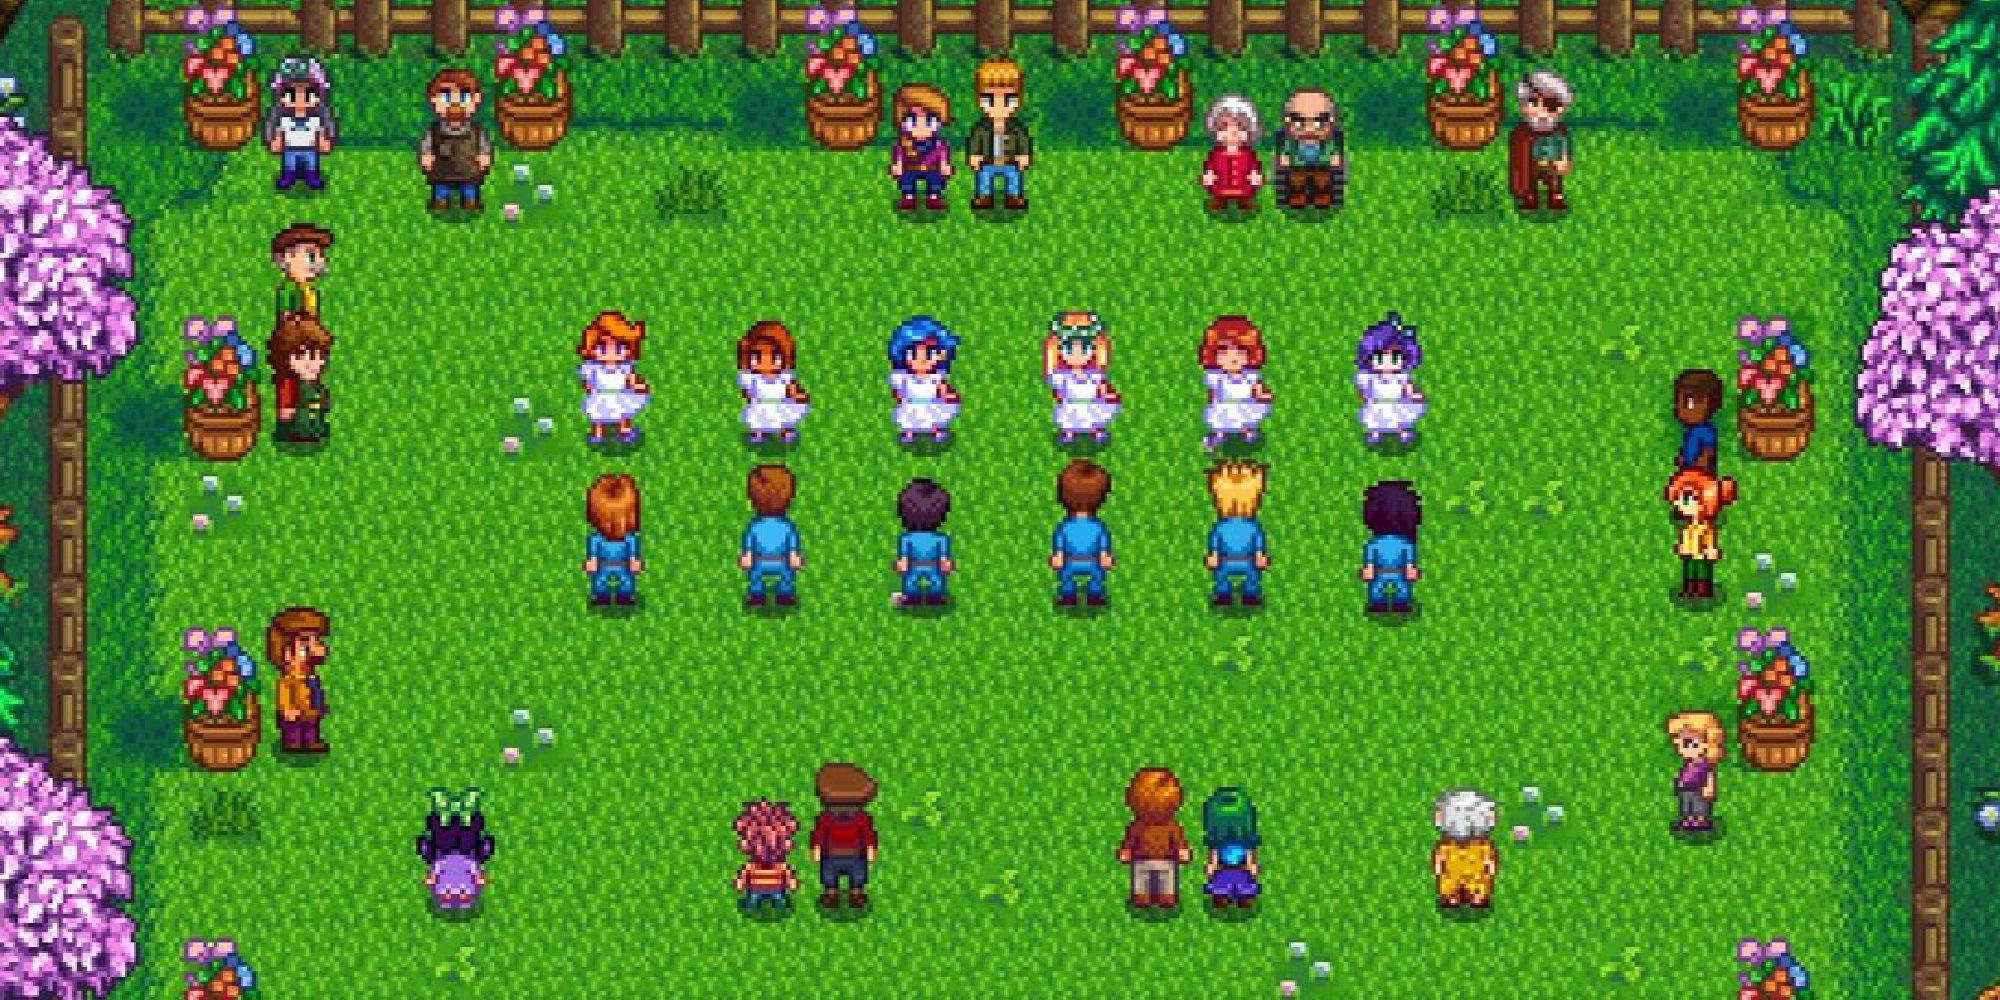 An image from Stardew Valley of the Flower Dance, where the entire town gets together to dance in a field.